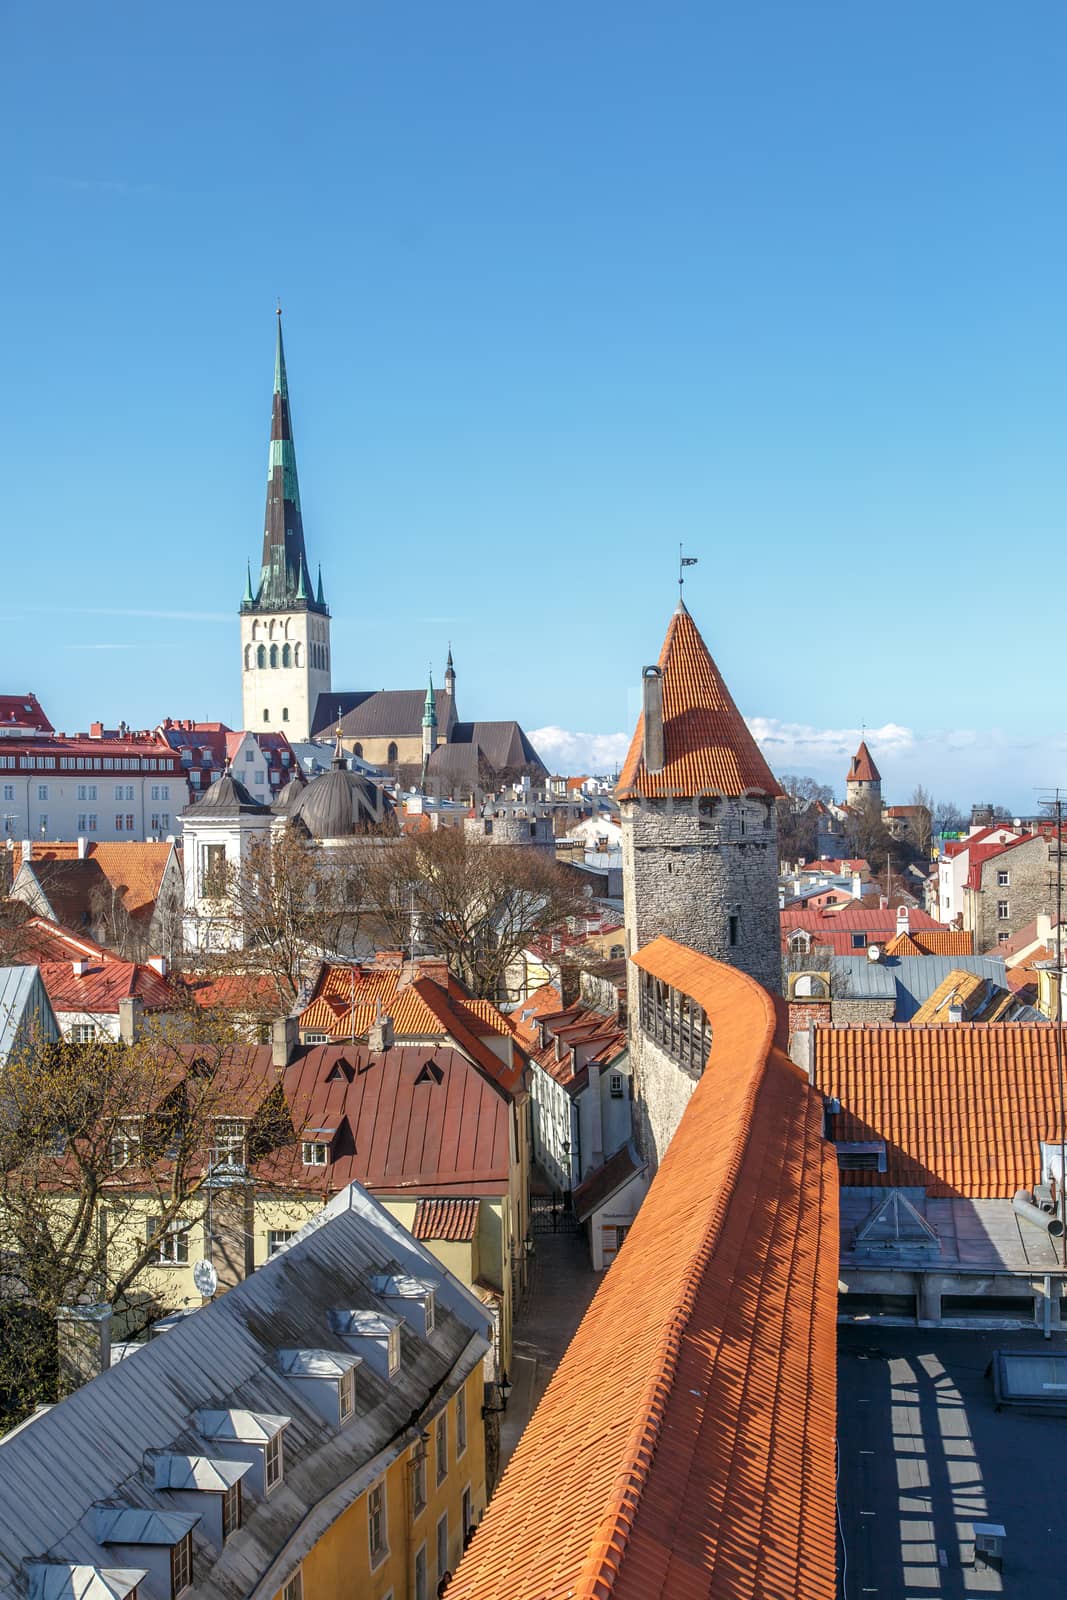 TALLINN, ESTONIA - APRIL 25, 2015 : Close up view of the observation deck of Tallinn Walls in Estonia, ancient stone fortress from medieval time, on blue sky background.